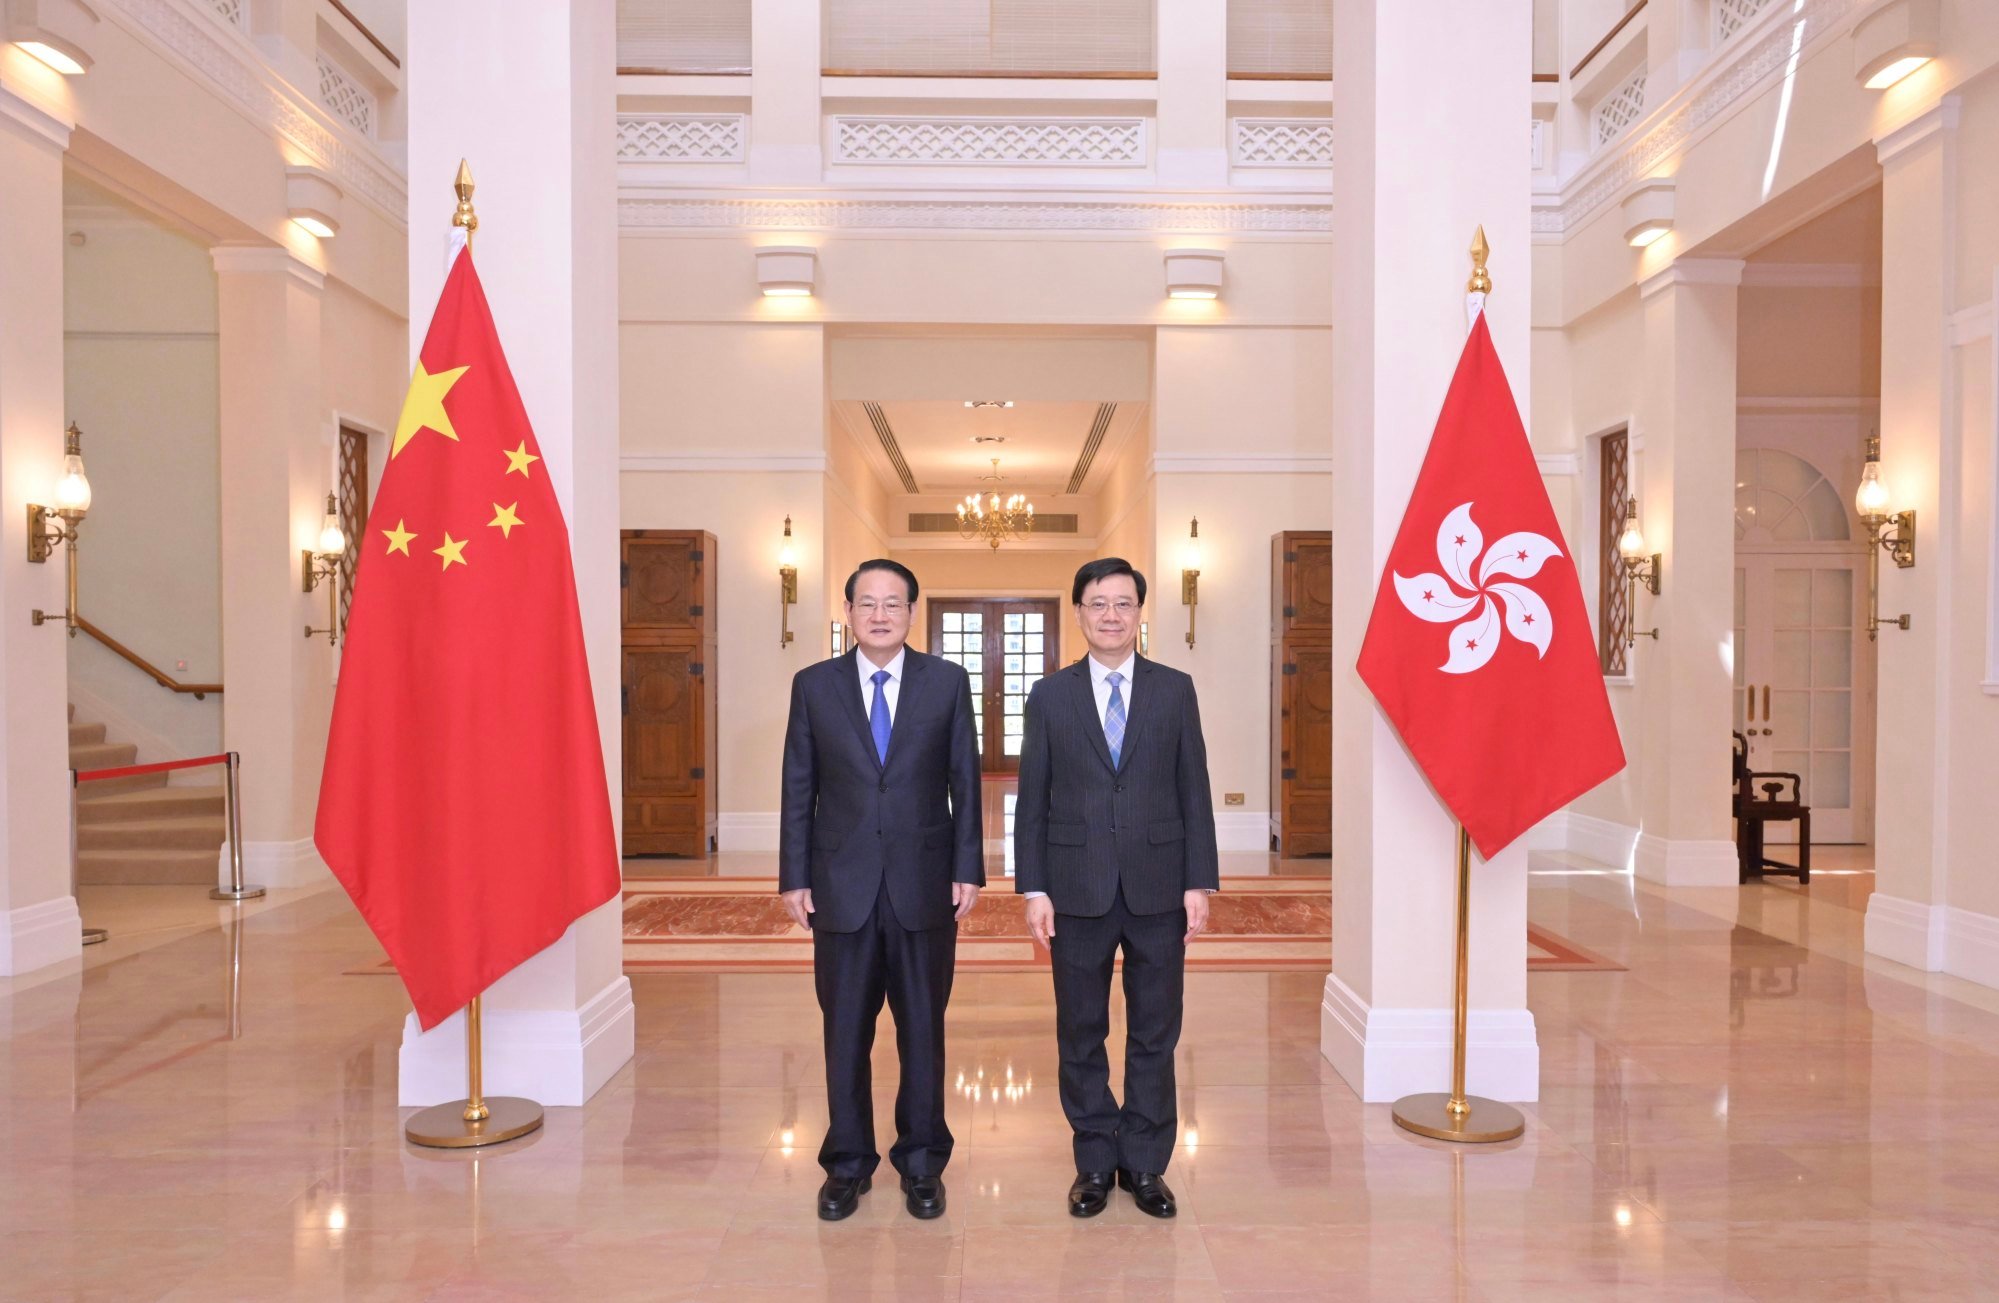 Hong Kong Chief Executive John Lee (right) meets with the Secretary of the Zhejiang Chinese Communist Party Provincial Committee Yi Lianhong on June 26. Photo: Handout